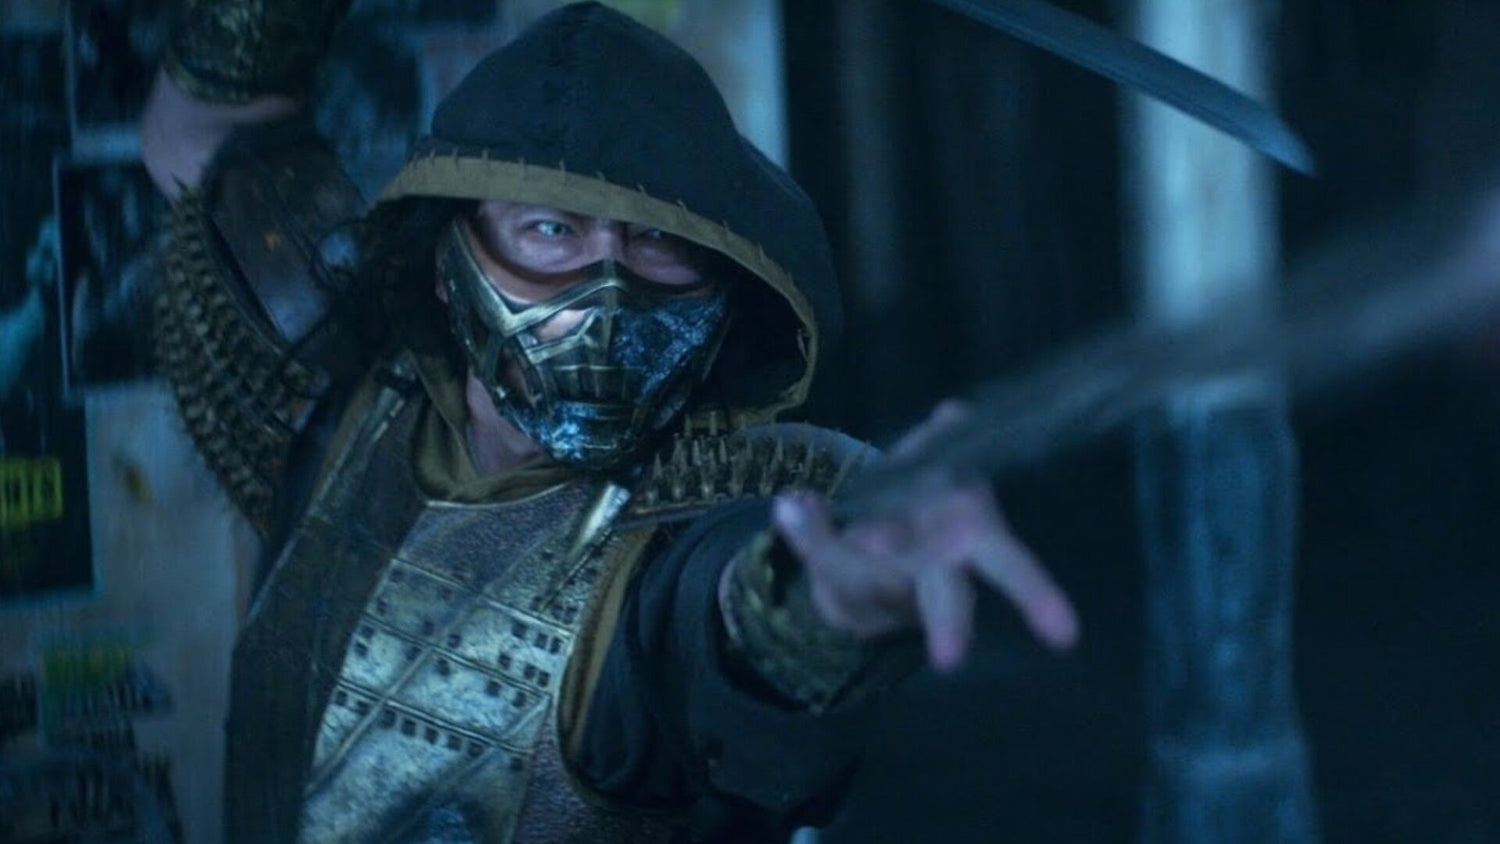 The Mortal Kombat featurette 'Meet The Kast' offers an in-depth look one of the most anticipated films of 2021